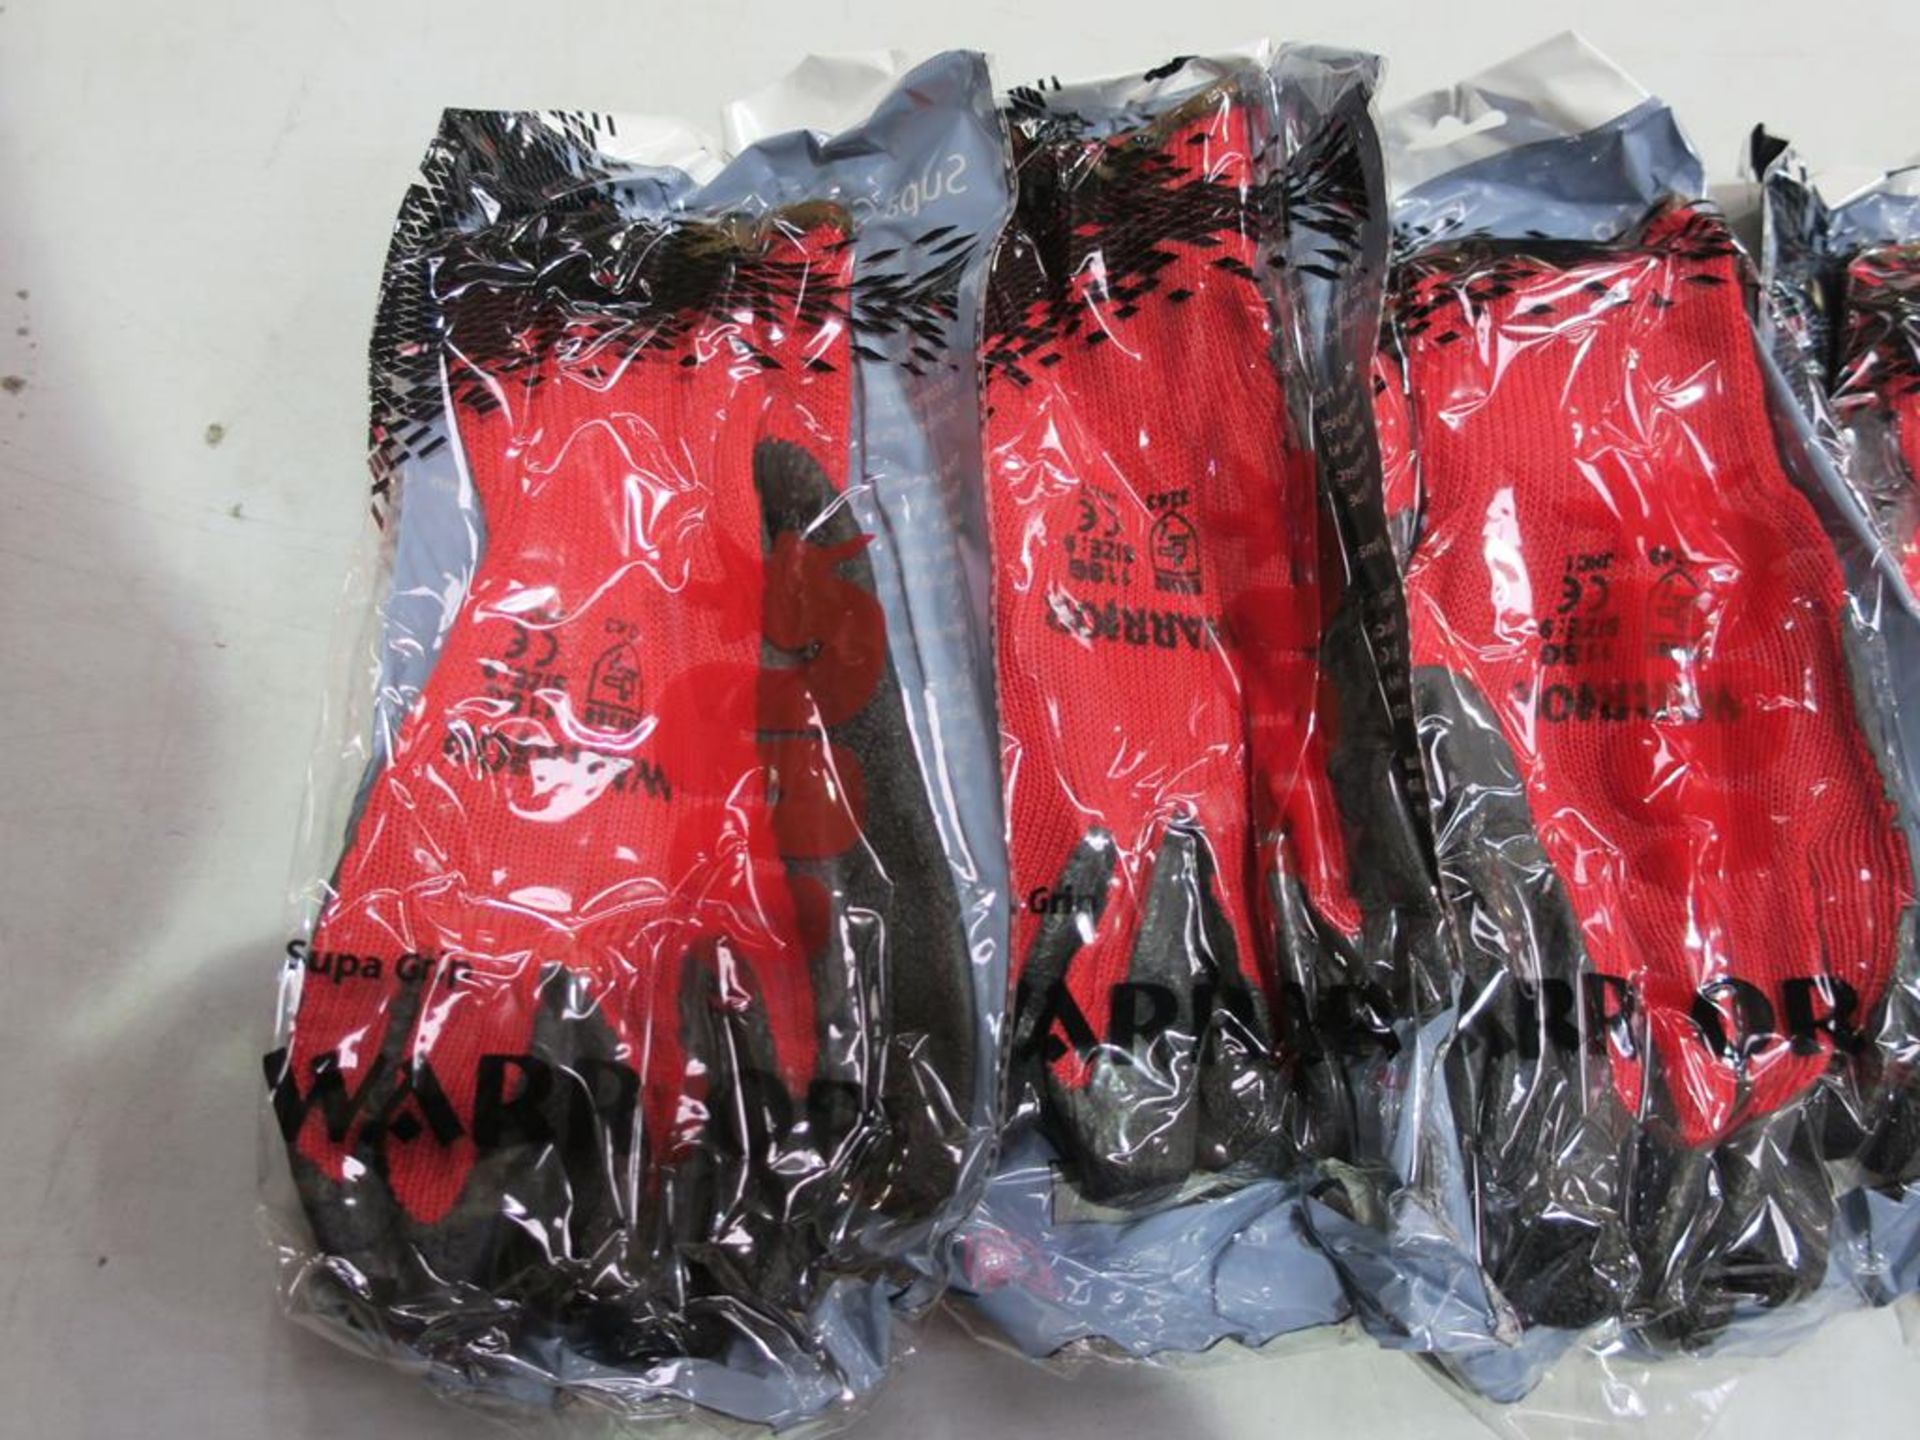 * A box of 120 pairs of size 9 Black and Red Workwear Gloves - Image 2 of 3